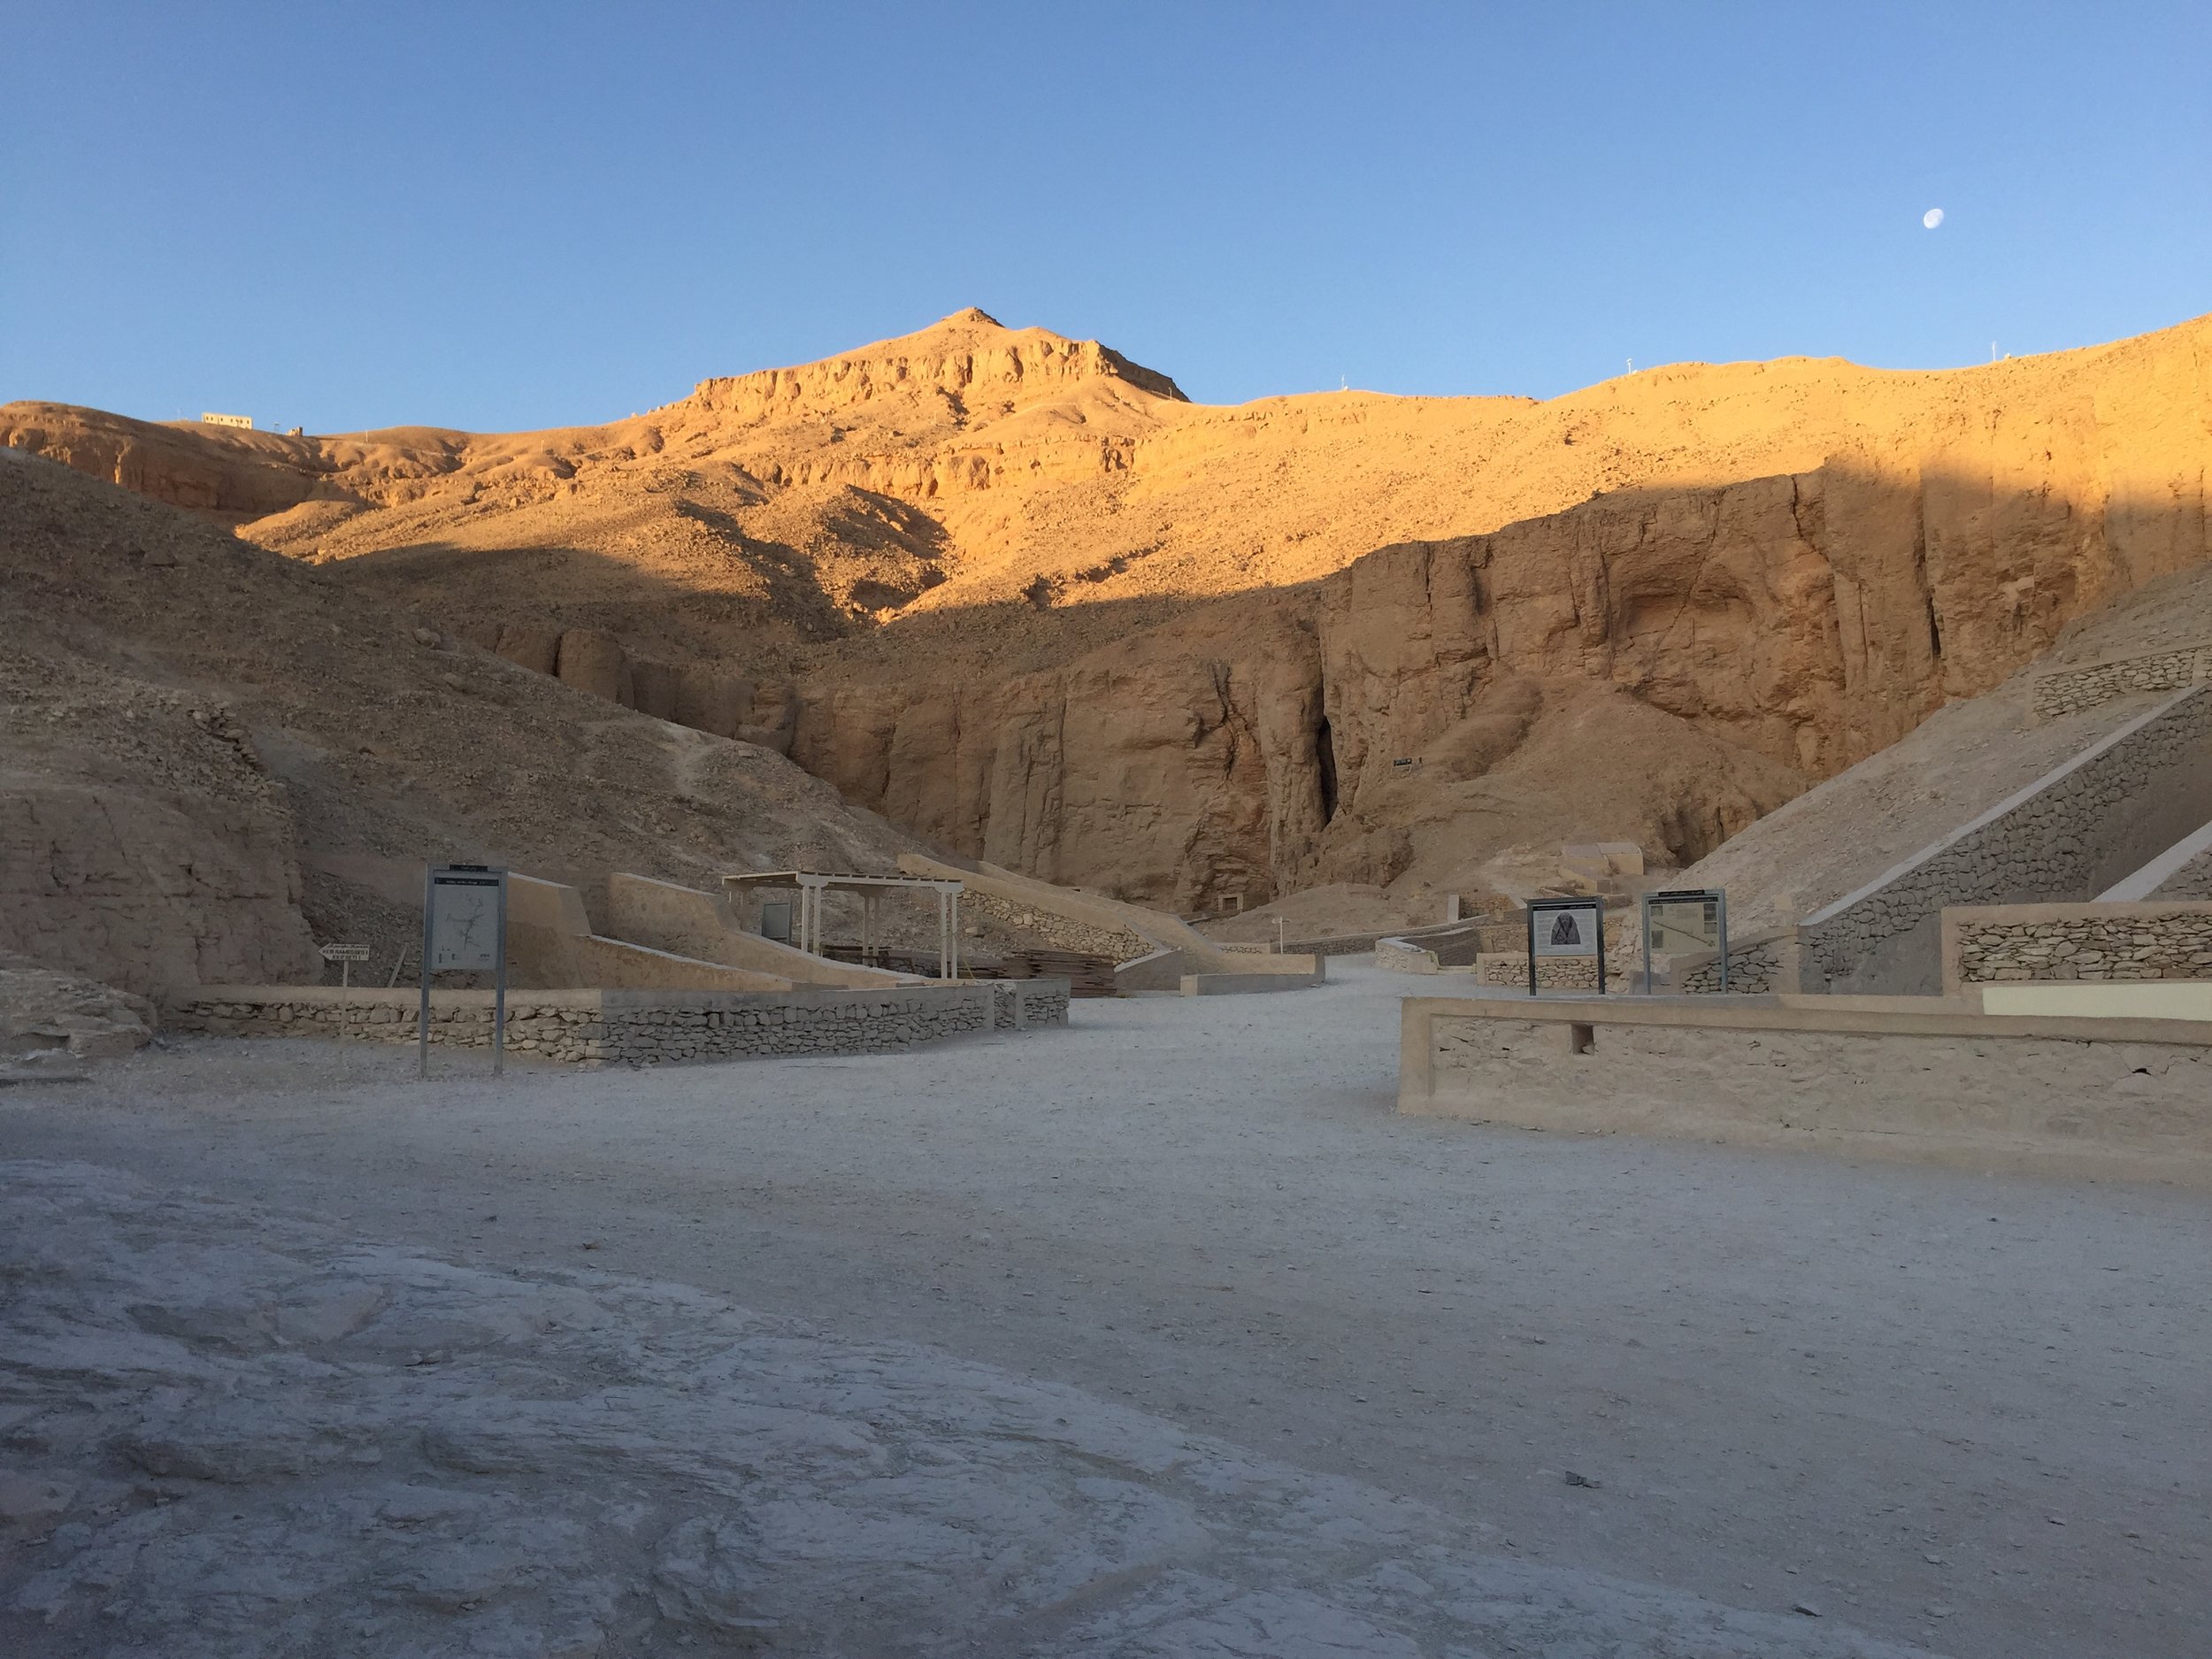  Daybreak in the Valley of the Kings. The entrance to King Tut's tomb is located just to the right of the captured frame.&nbsp;  Image © J. Paul Getty Trust, 2017 